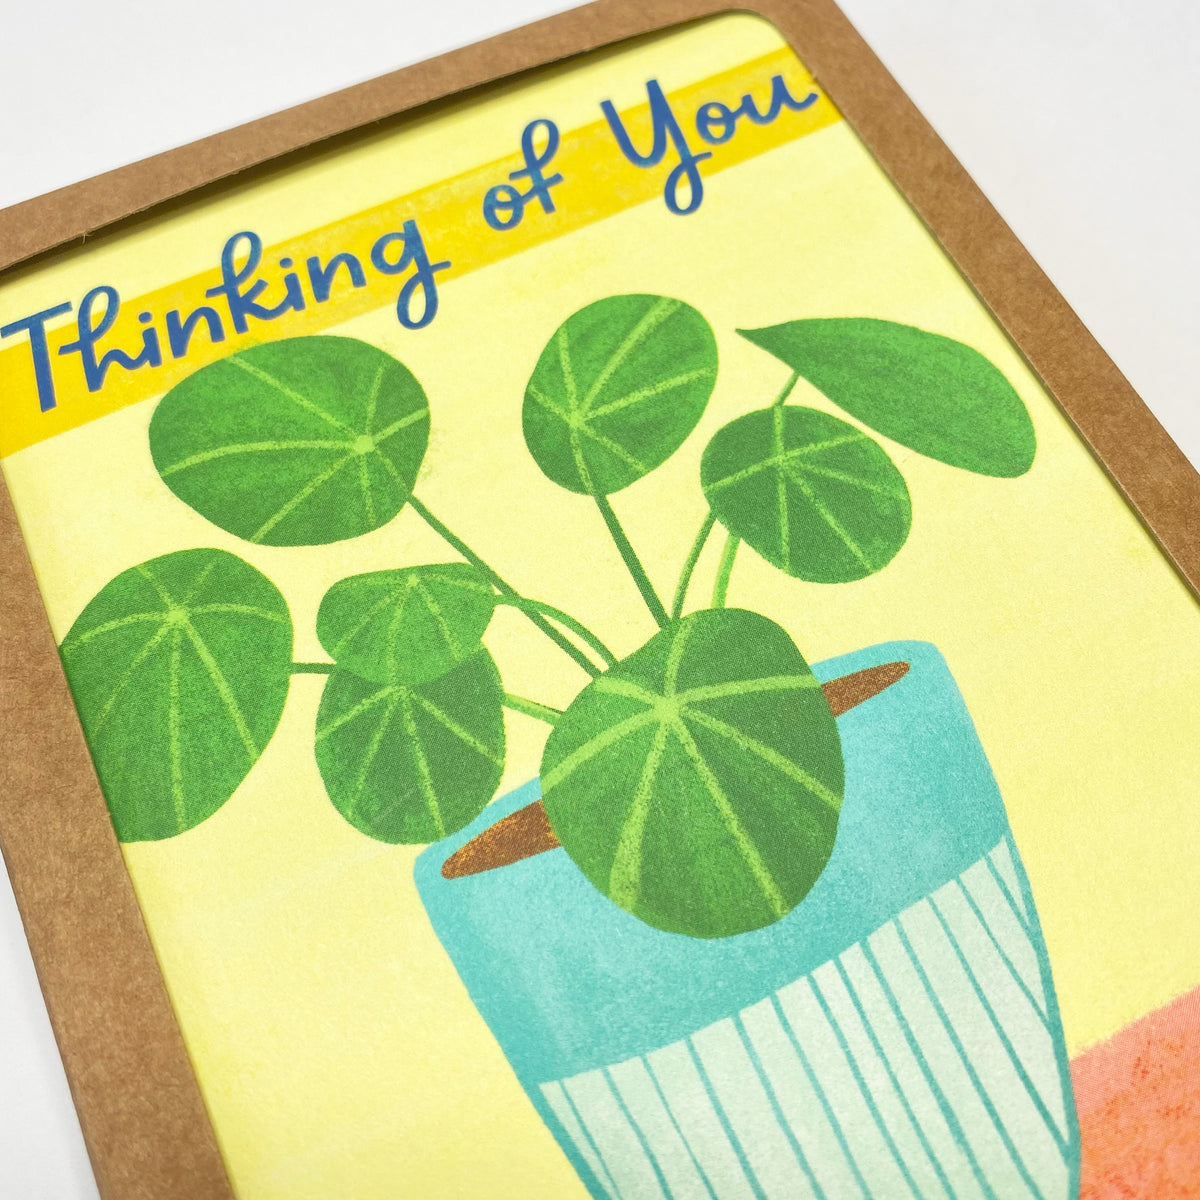 Boxed Set of 8 Cards-Thinking of You Pilea Plant Greeting Cards